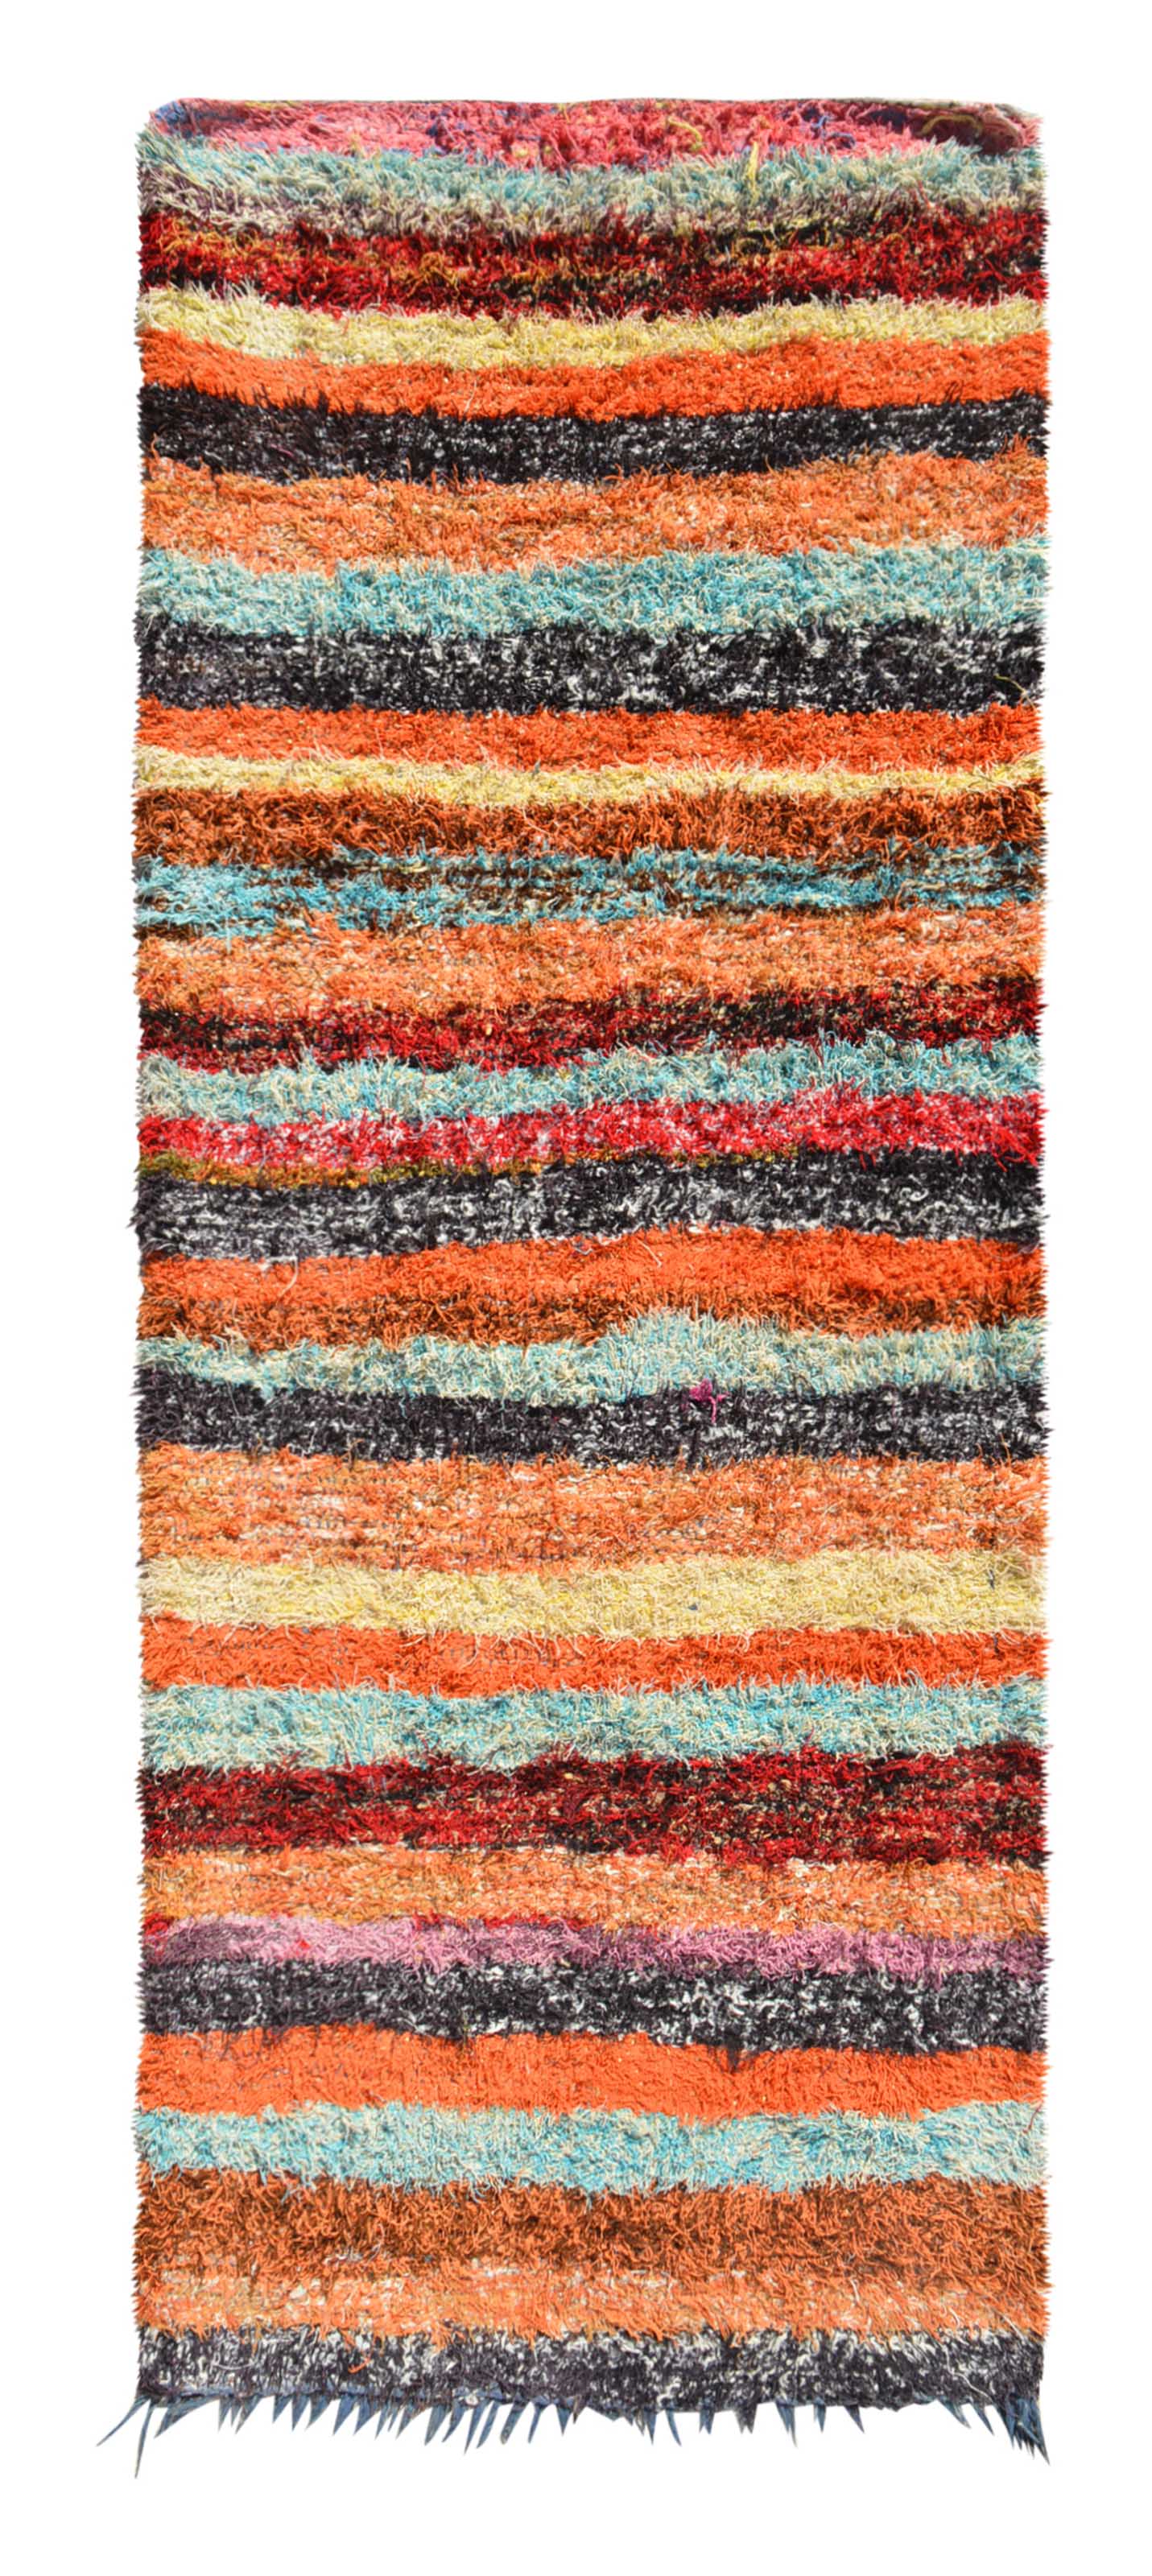 Vintage Moroccan Rug Vibrant Vintage Bright Rag Rug - Add a splash of color to your home illuminate collective